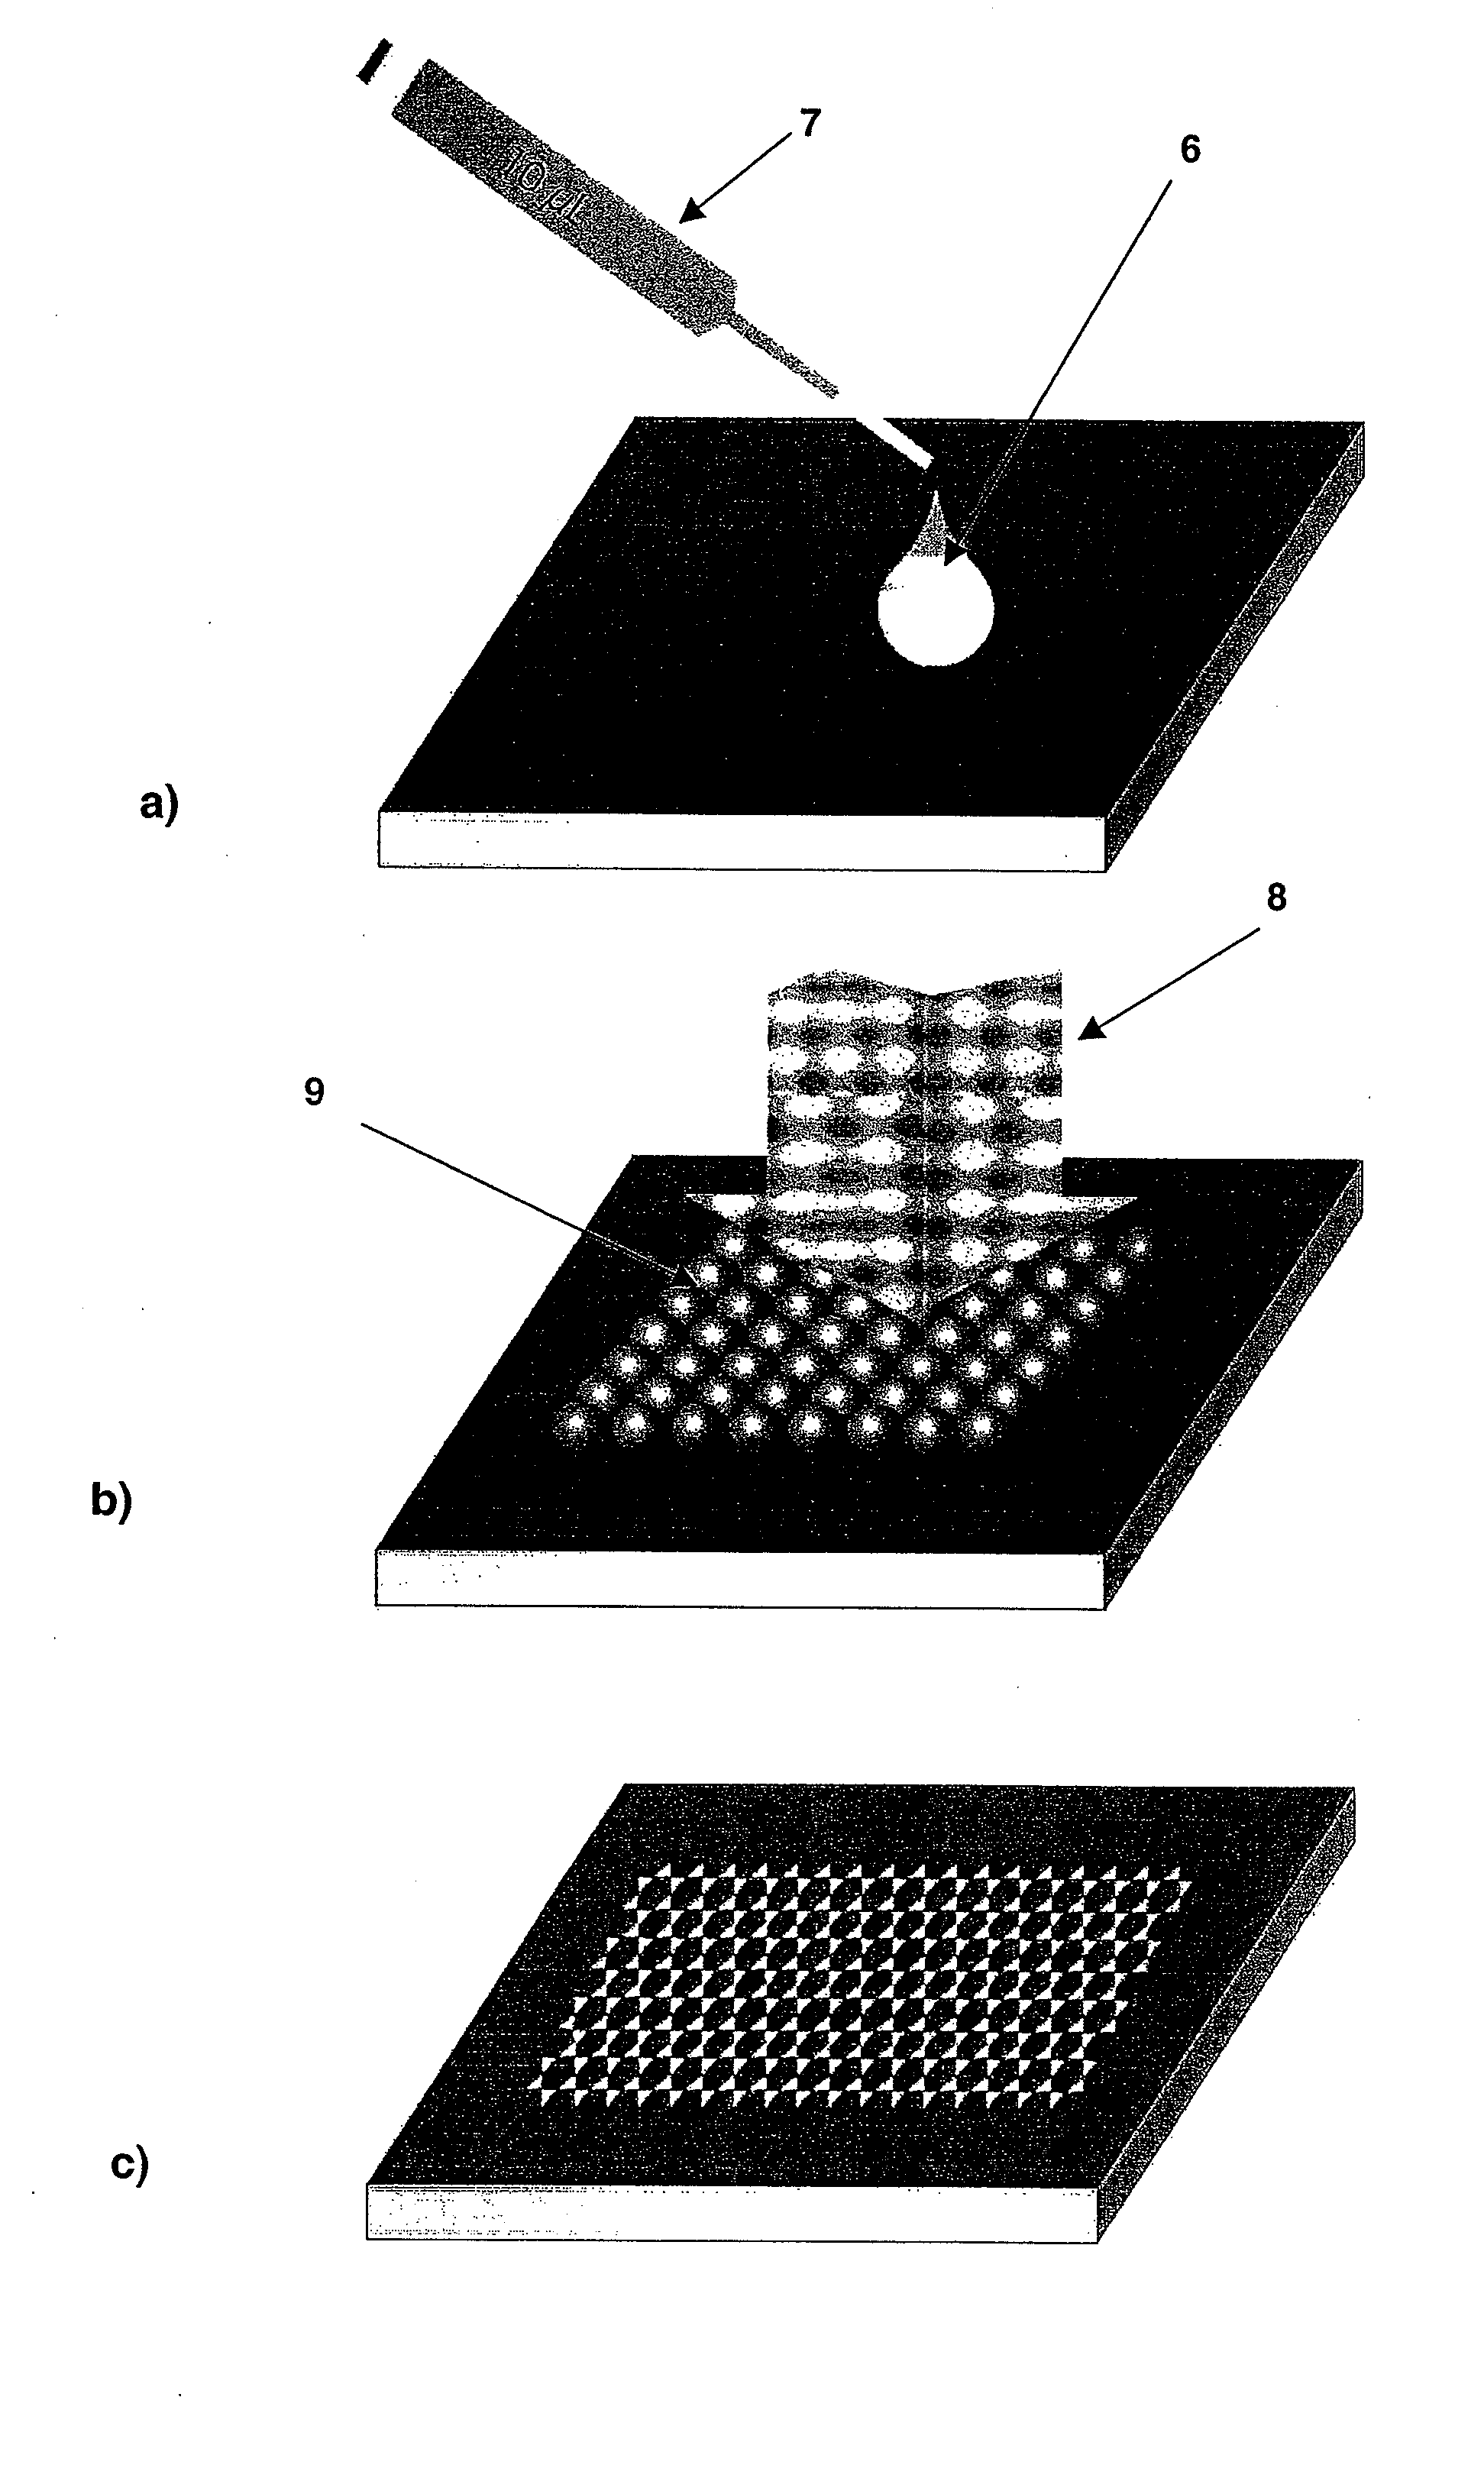 METHOD FOR PRODUCING A TOOL WHICH CAN BE USED TO CREATE OPTICALLY ACTIVE SURFACE STRUCTRES IN THE SUB-nuM RANGE AND A CORRESPONDING TOOL